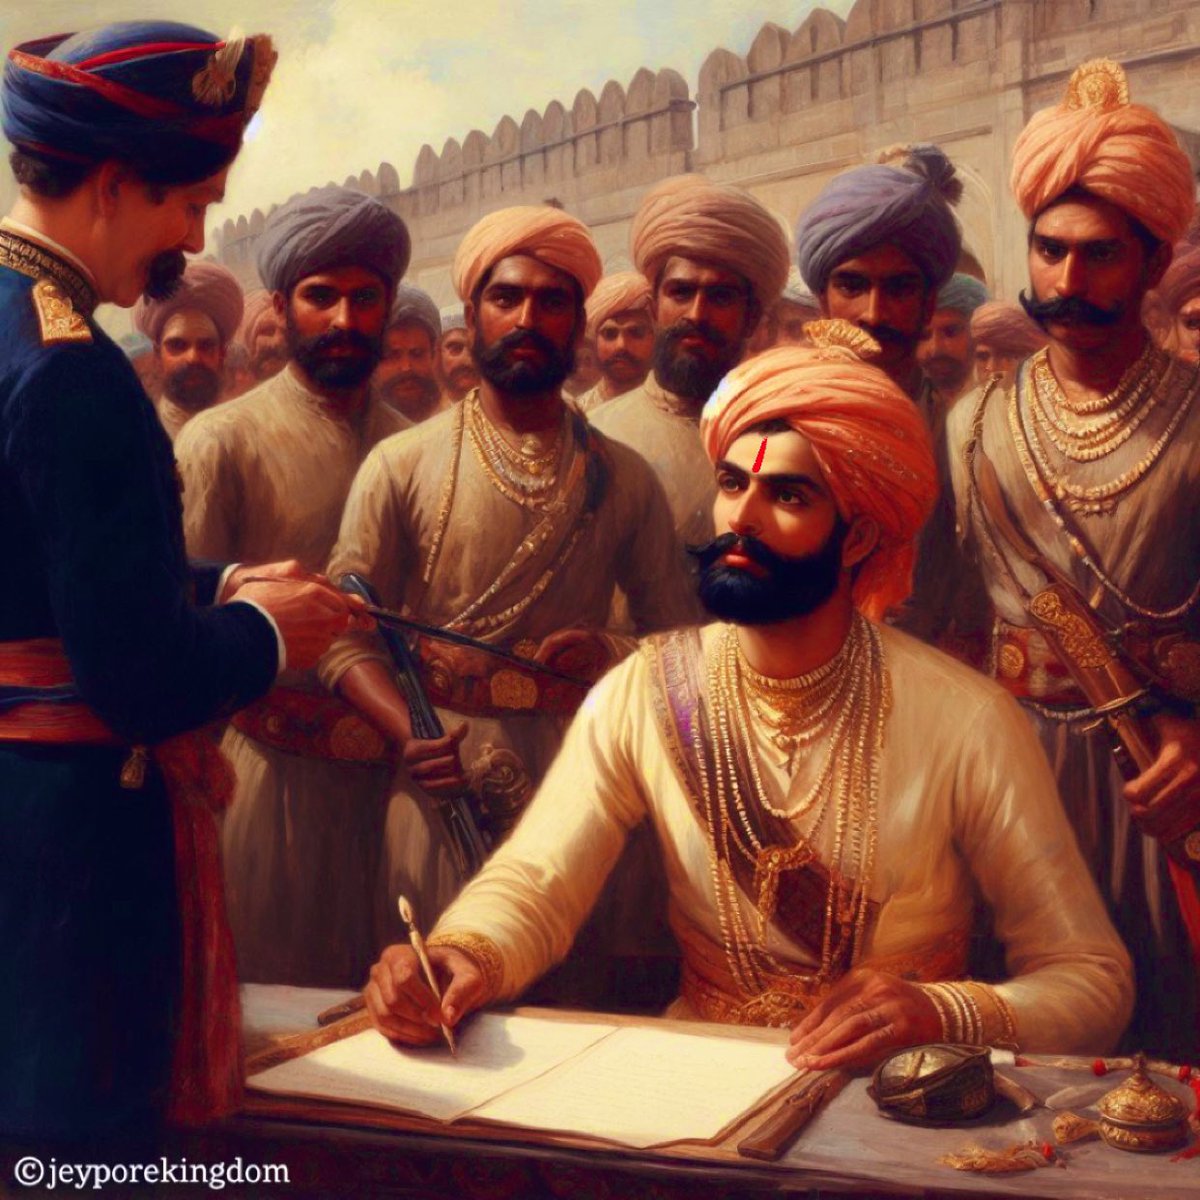 Upon losing the battle to the British aided by Vizianagaram - Maharaja Vikram Dev at first escaped and then recalled to accept the terms of surrender, take his kingdom as an estate of the British Crown and promise to pay an annual peshkush of Rs. 35000 to East India Company.